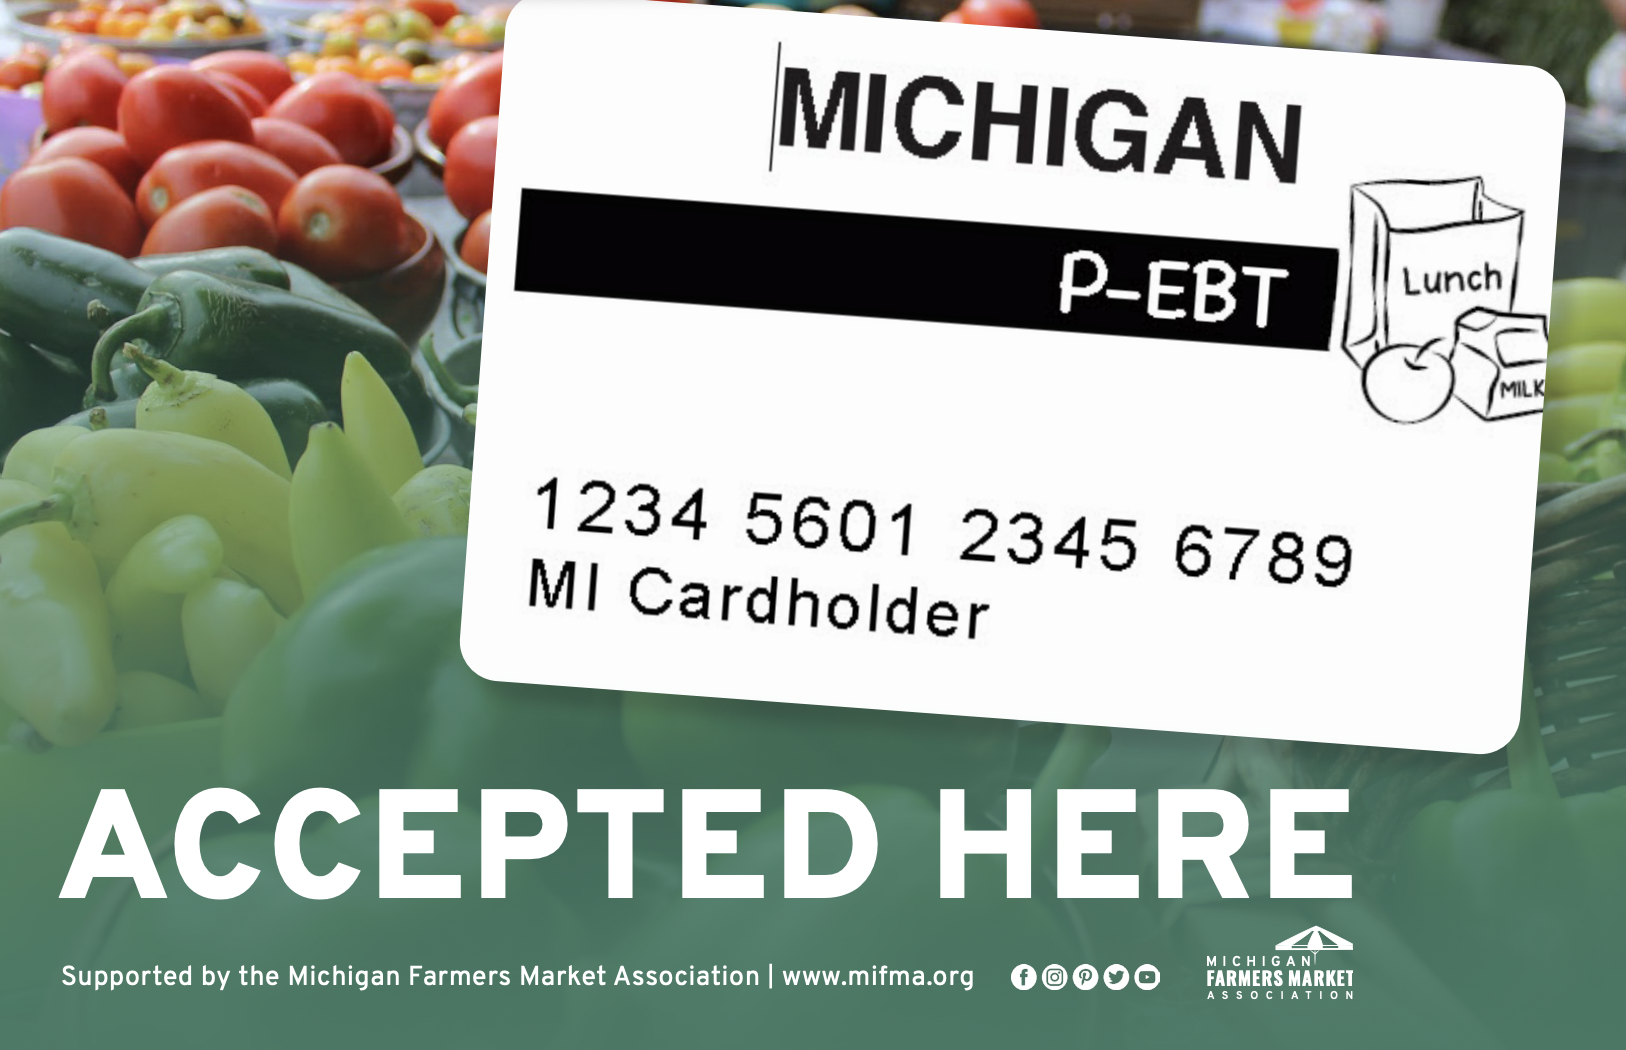 "PEBT Accepted Here" Printable Sign Michigan Farmers Market Association